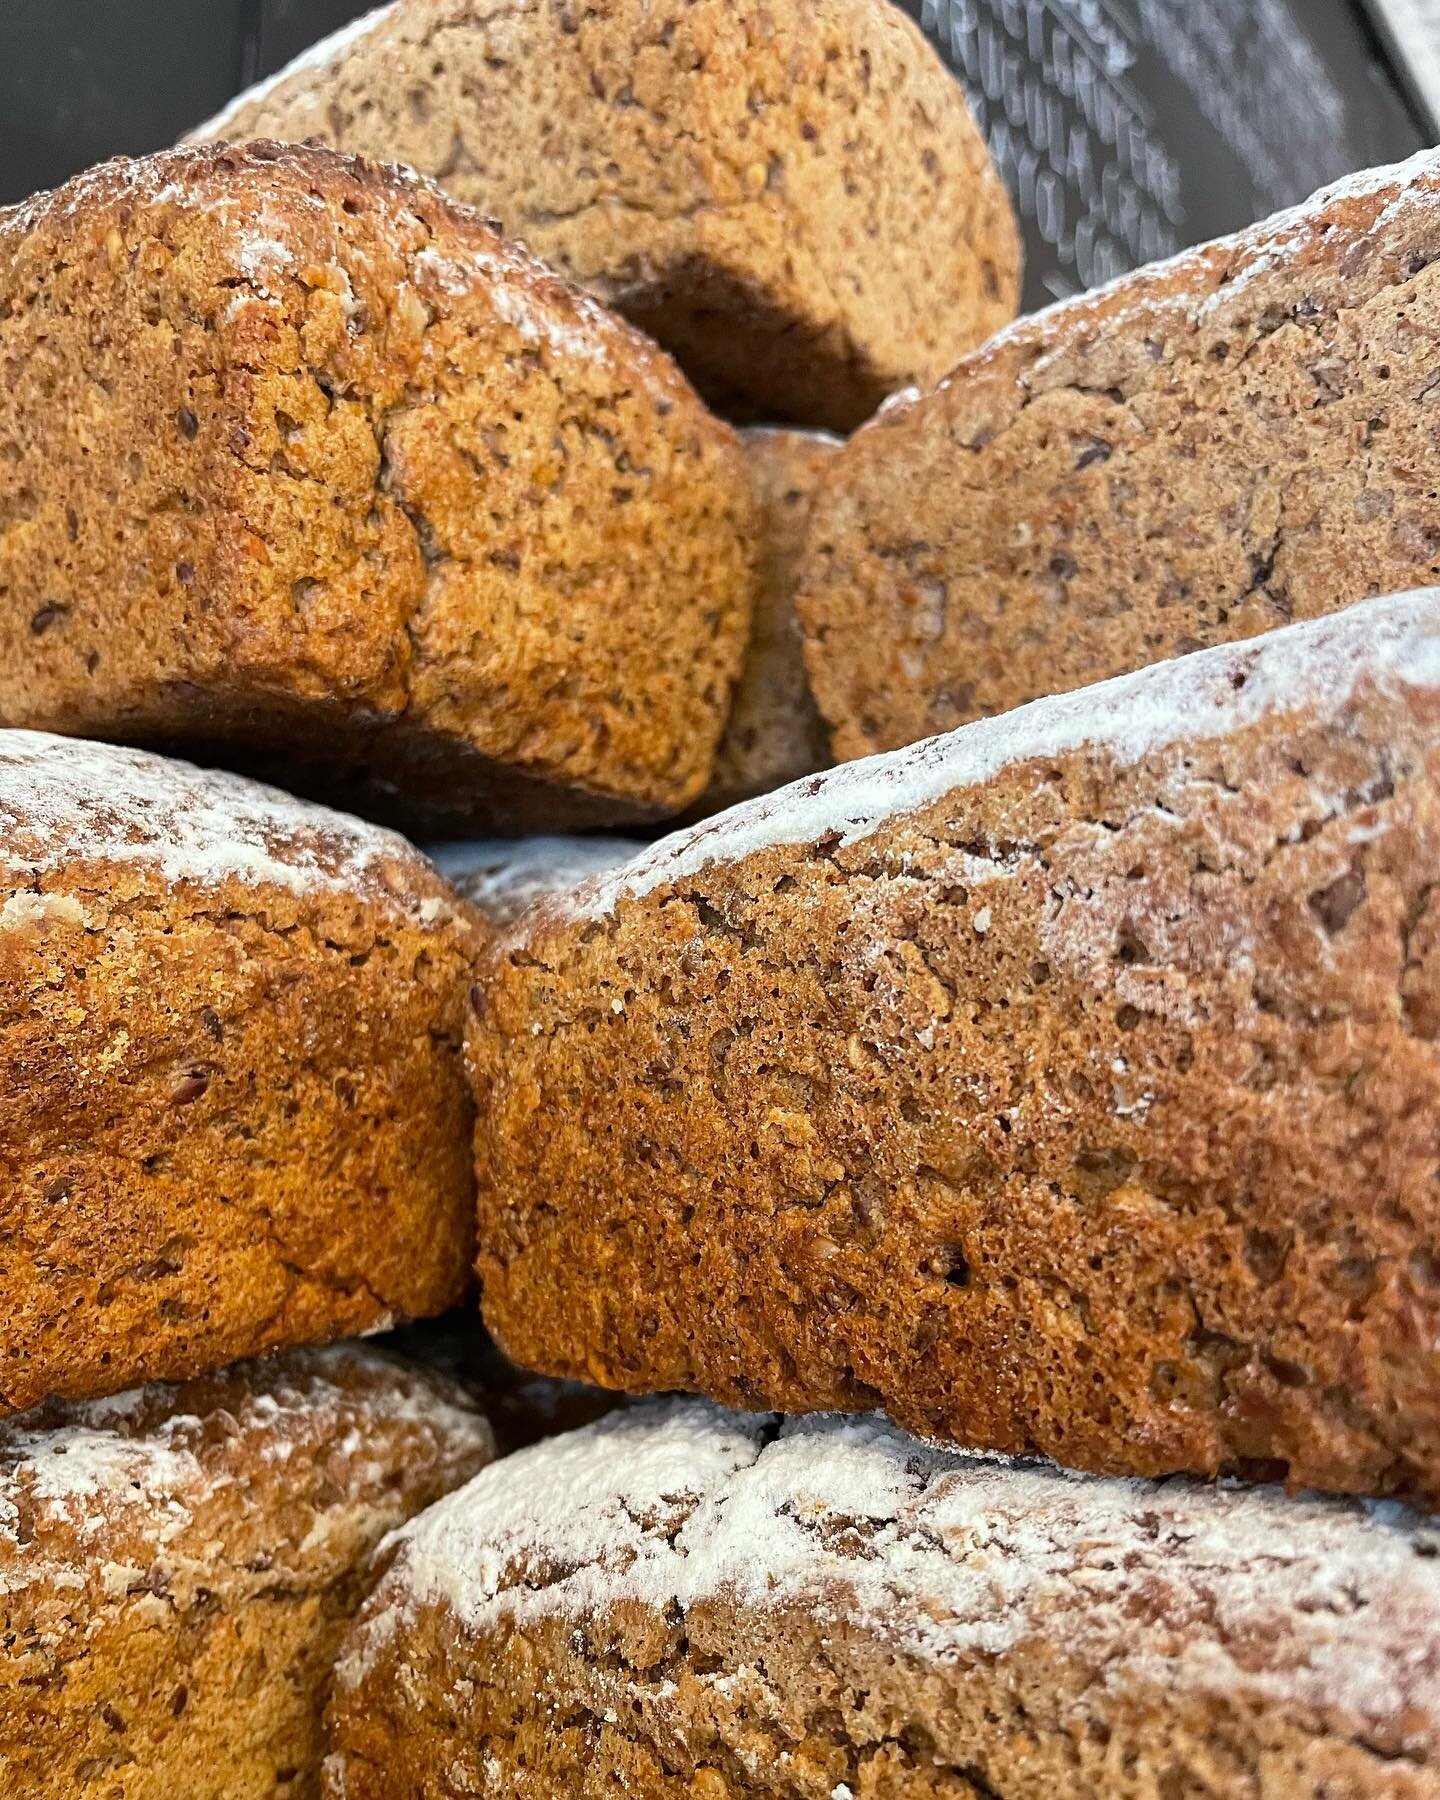 Volkenbrot - 100% German rye loaded with sunflower and flax seeds naturally leavened for ultimate flavor and nutrition!